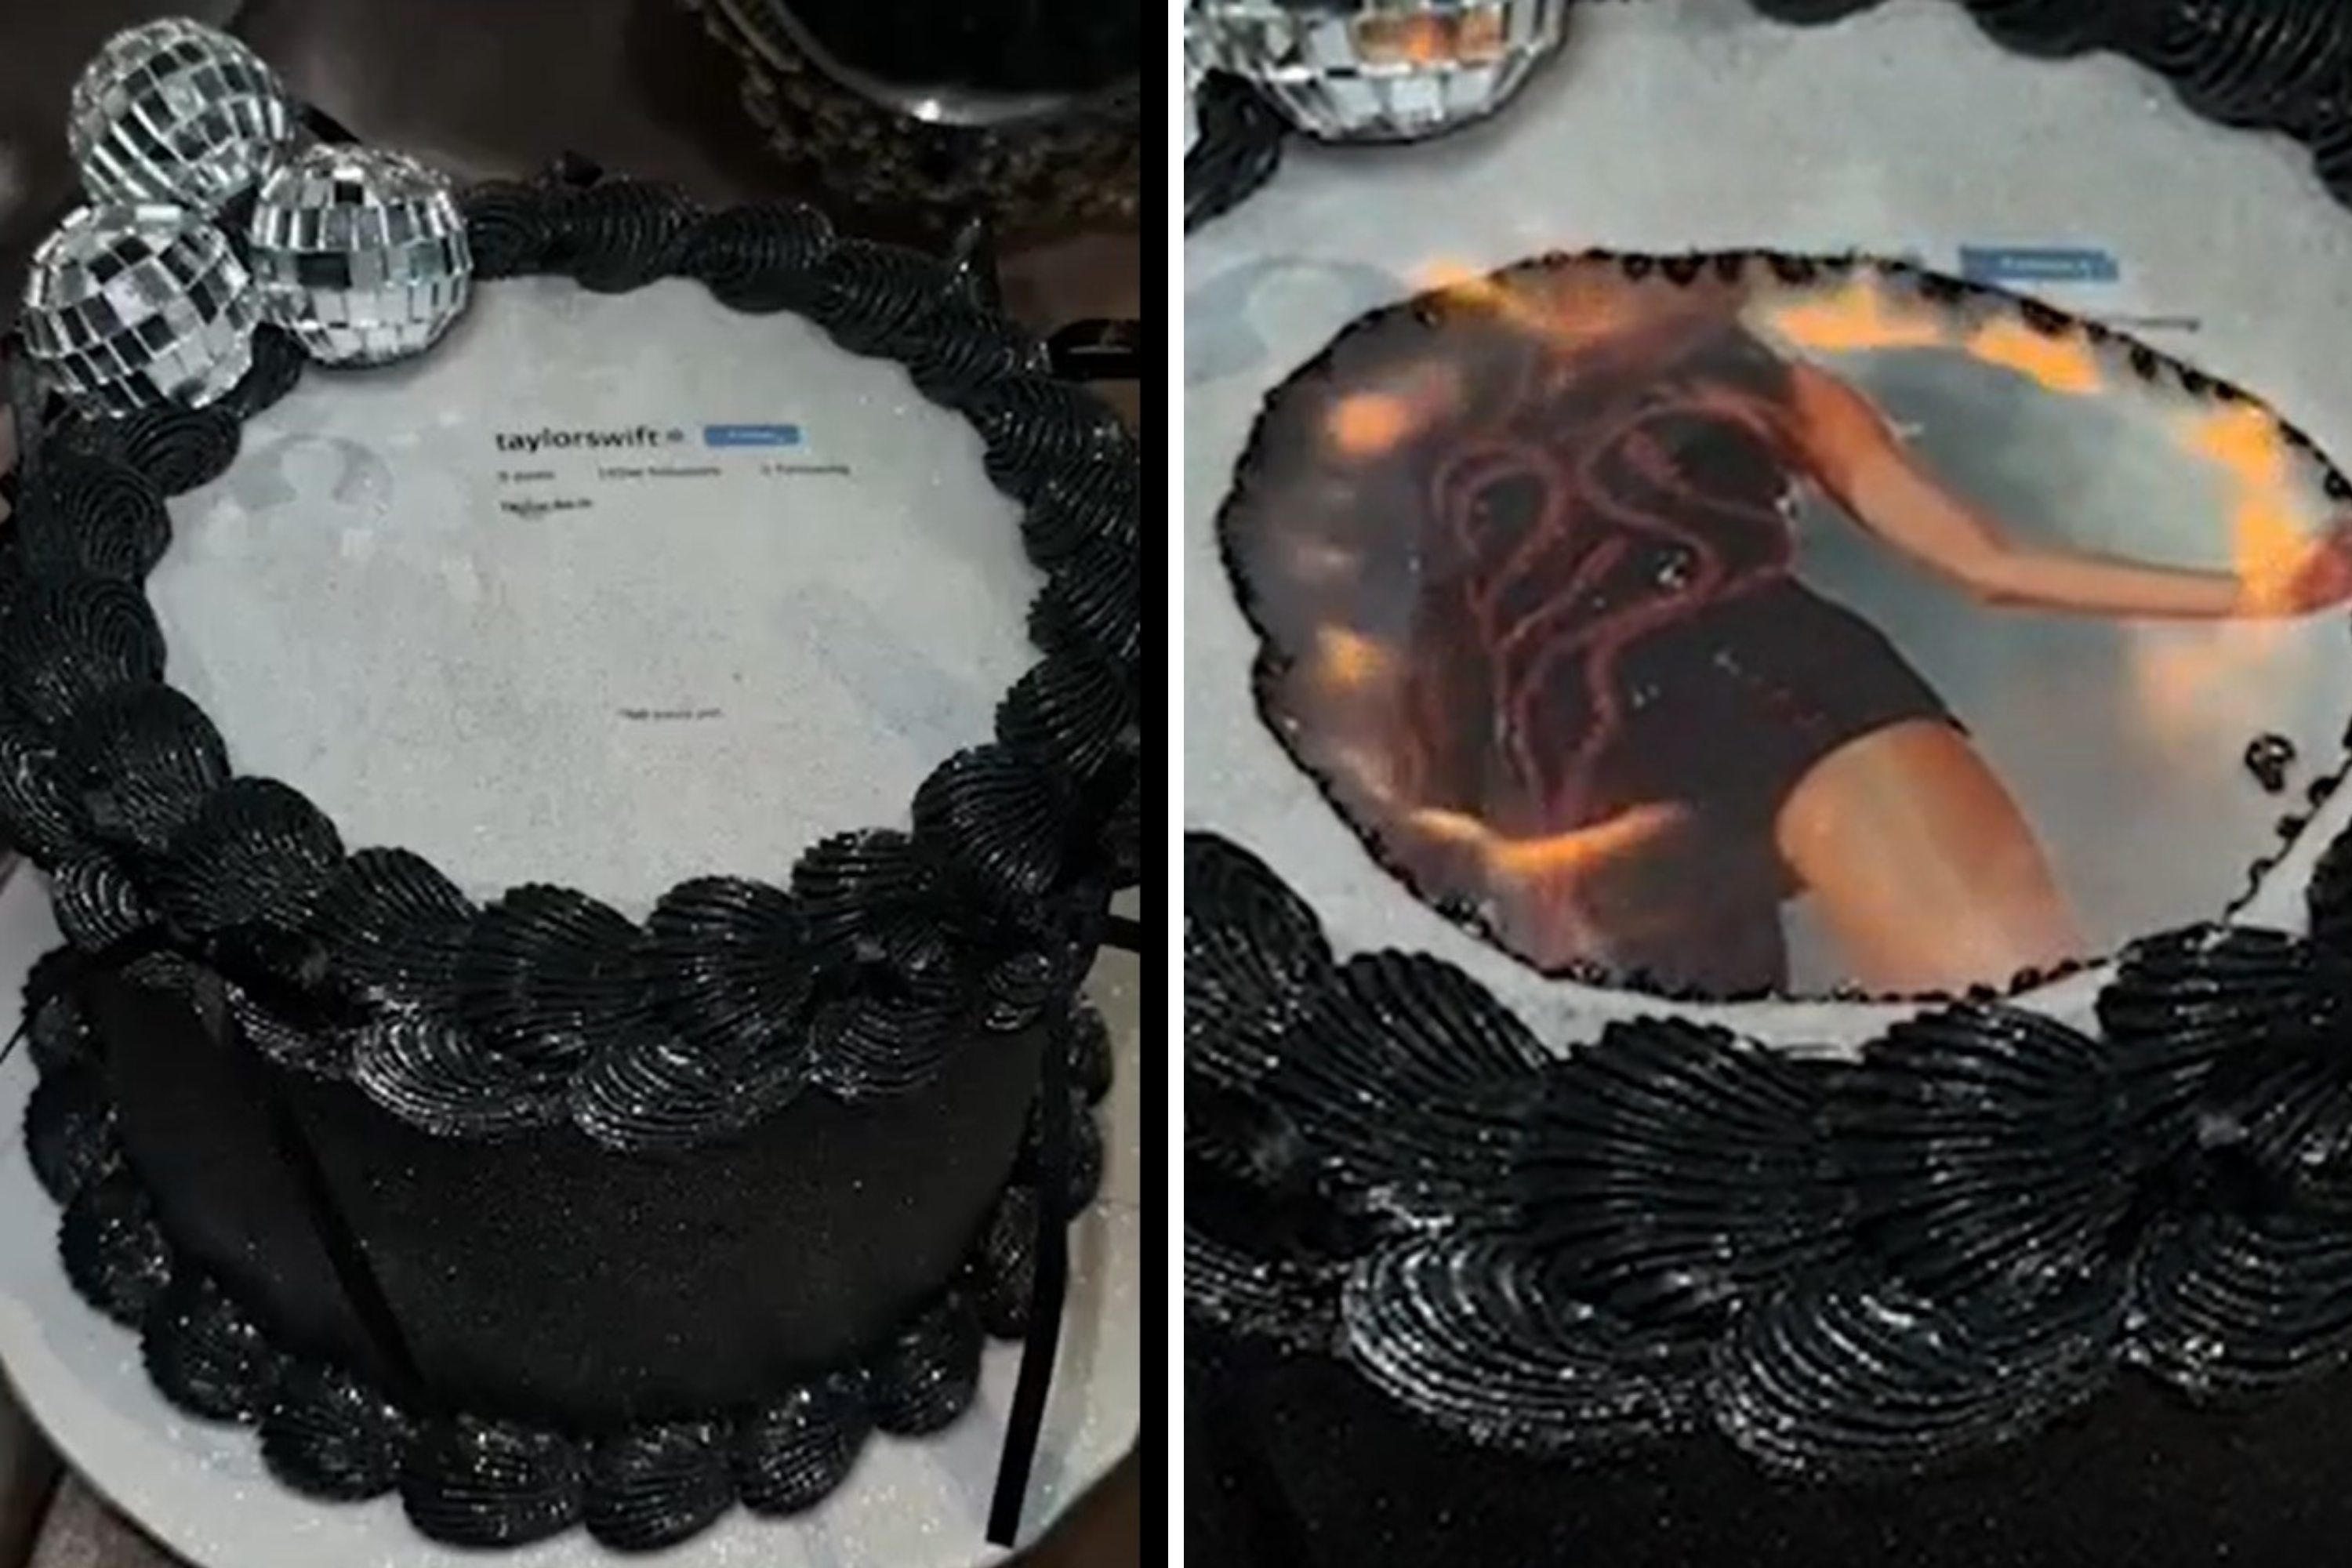 How to Turn Someone's Face into a Cake - Taylor Swift Cake 